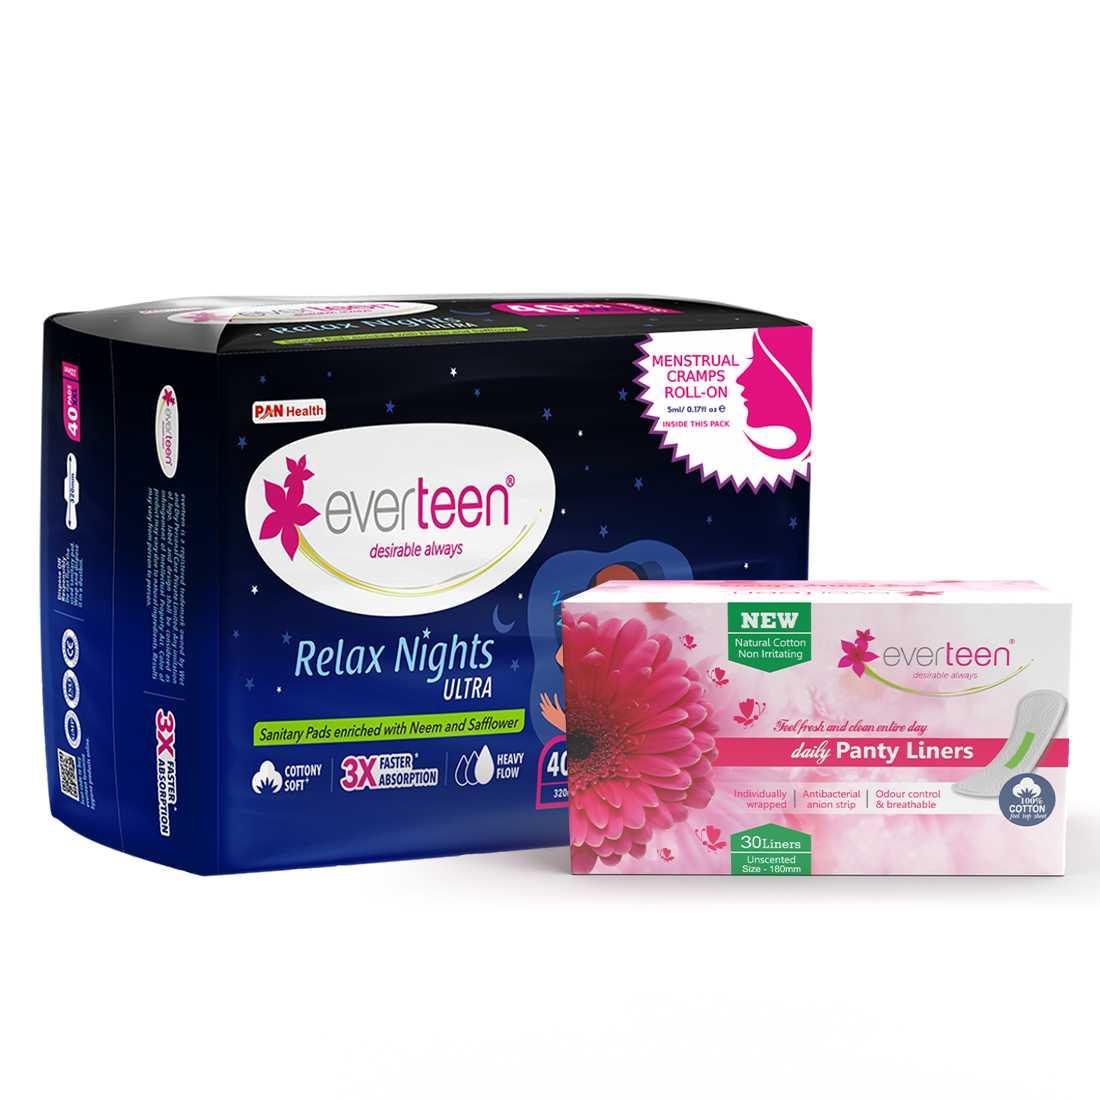 everteen Relax Nights Ultra 40 Pads and Daily Panty Liners 30pcs 7419870671280